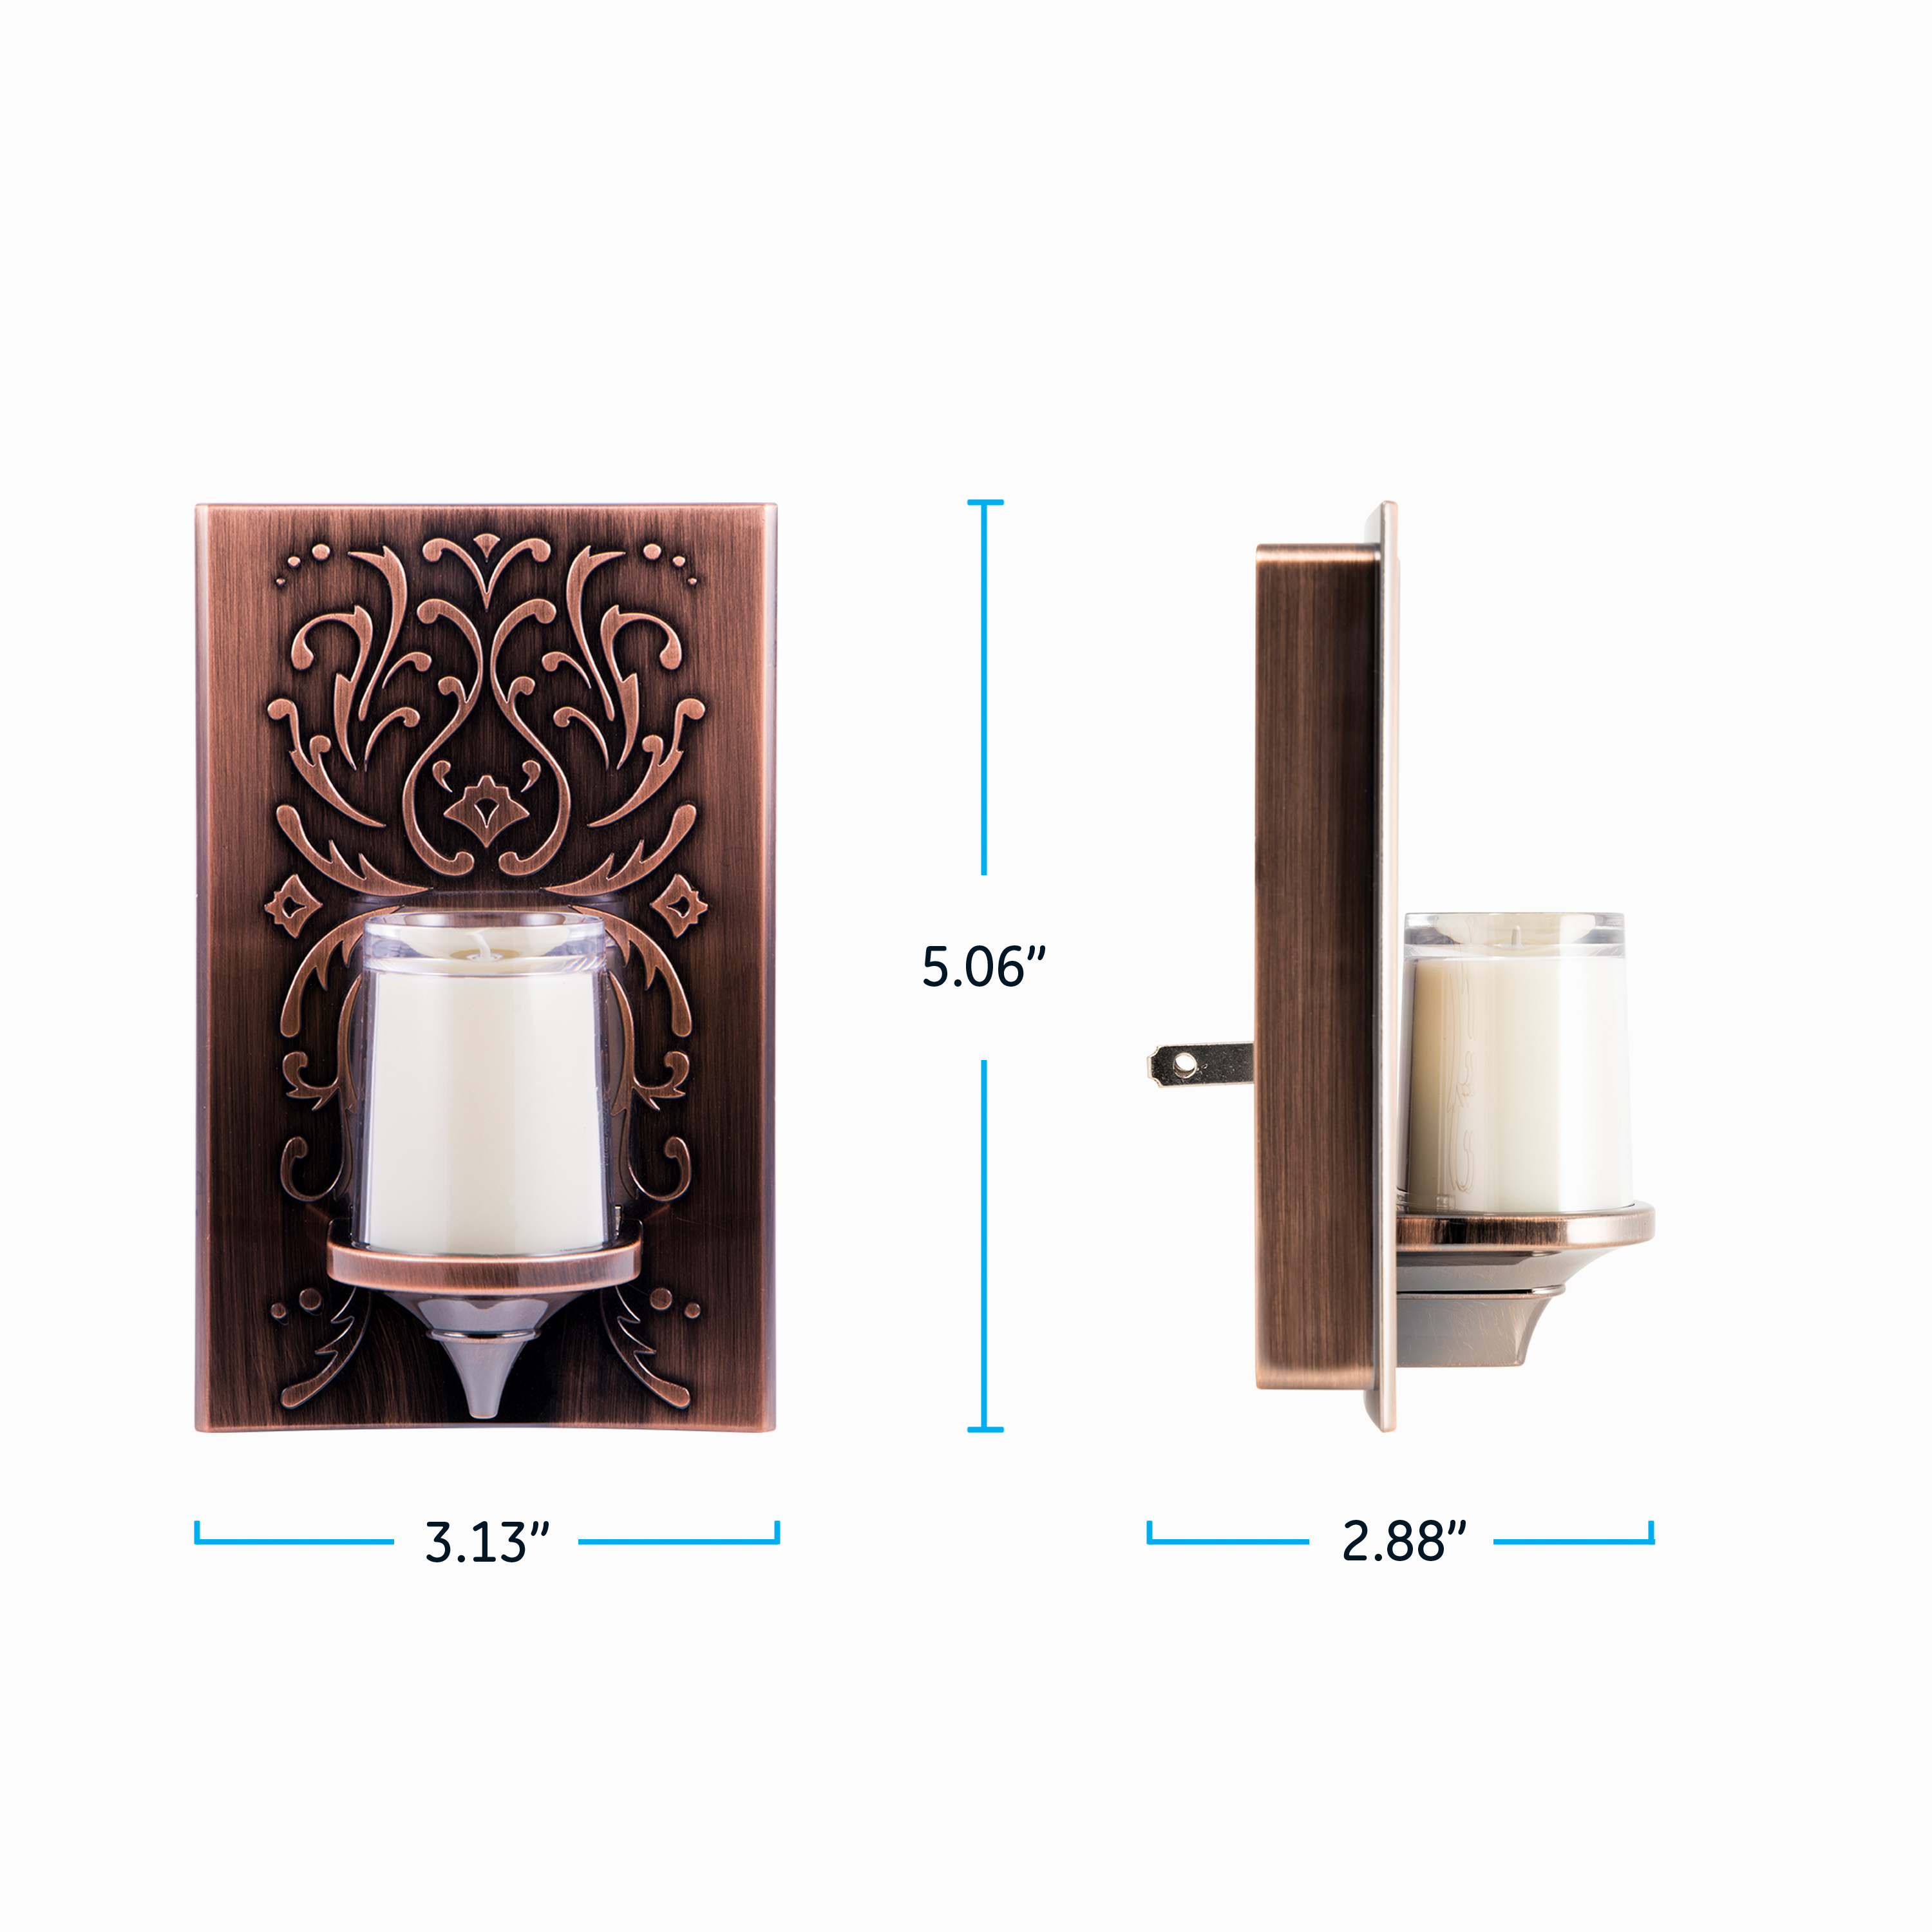 GE CandleLite LED Plug-In Night Light, Flickering Candle Design, Oil Rubbed Bronze, 11258 - image 5 of 7